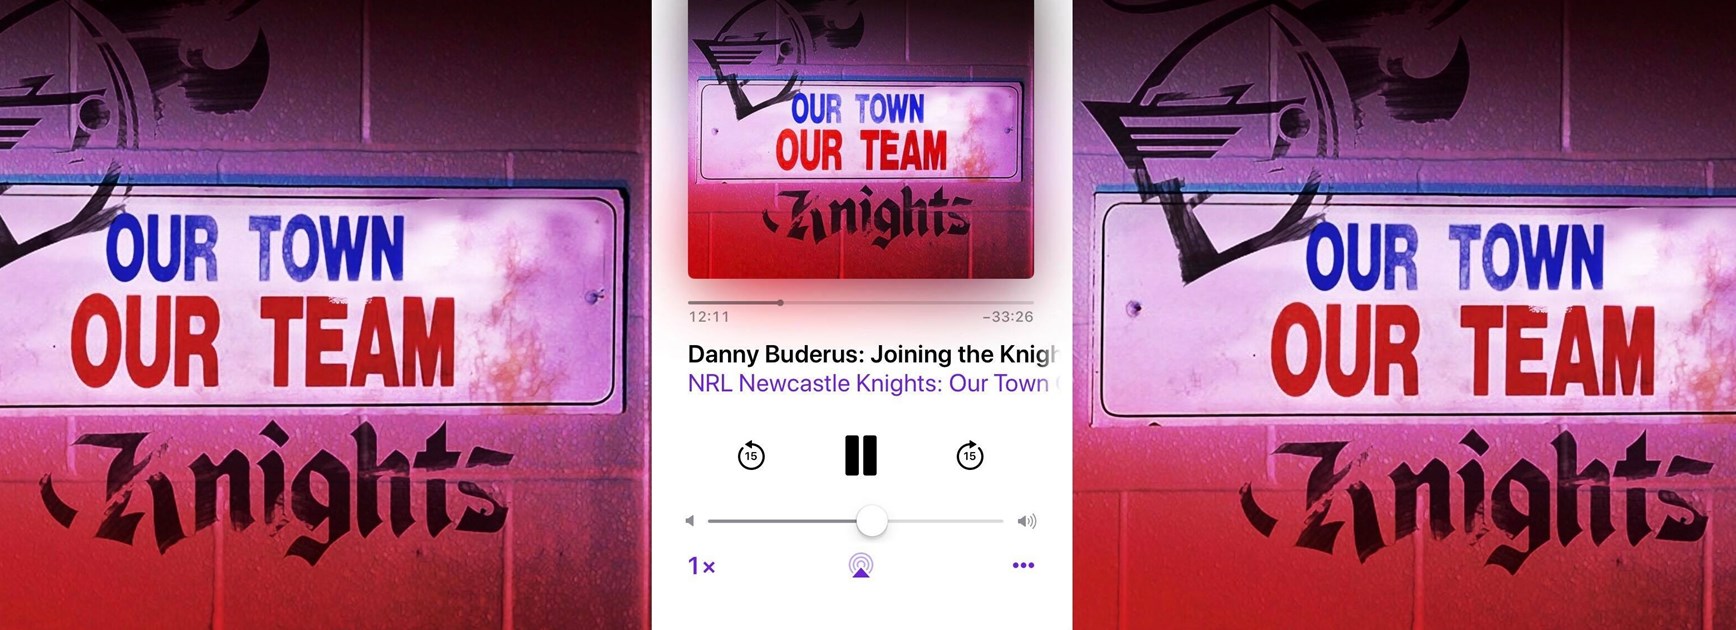 Buderus: Joining the Knights, 2001 GF, Joey and life after football